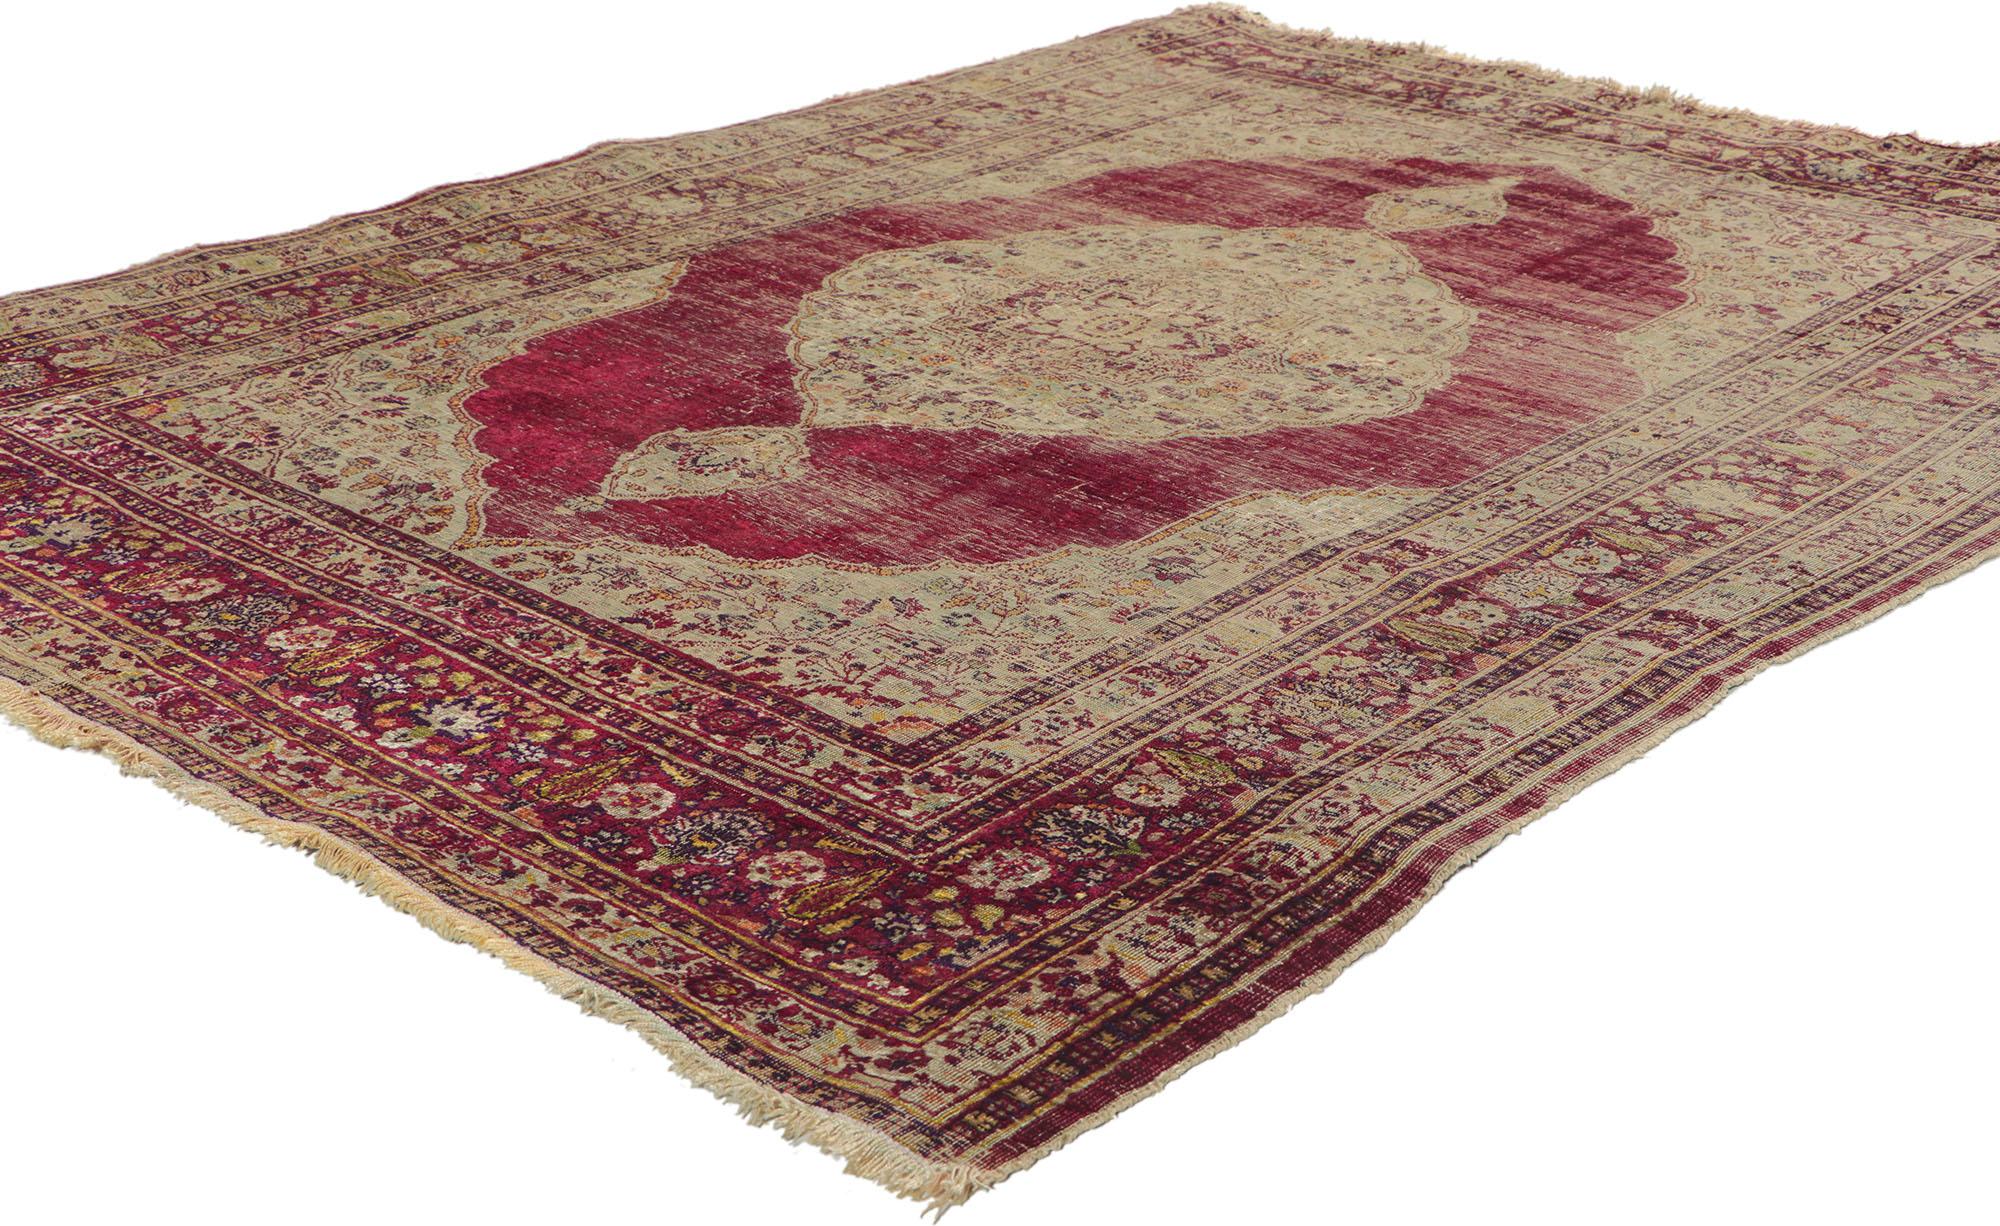 This charming vintage Persian silk Tabriz rug features a grand medallion with two cartouche finials in a red field surrounded by complementary spandrels and equally compelling border. An open red field takes center stage as the decorative palettes